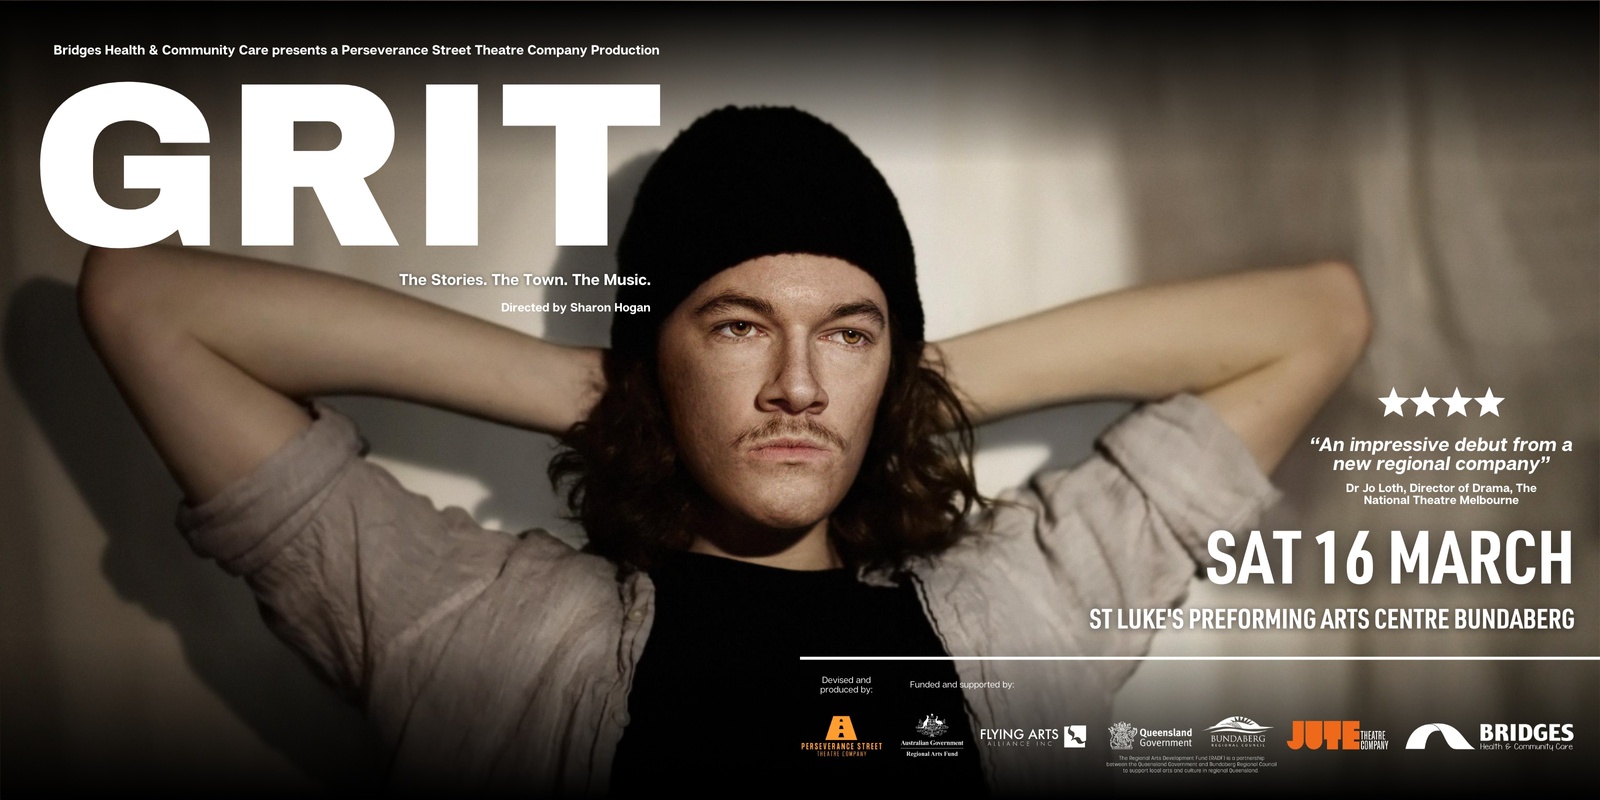 Banner image for GRIT - The Stories, The Town, The Music